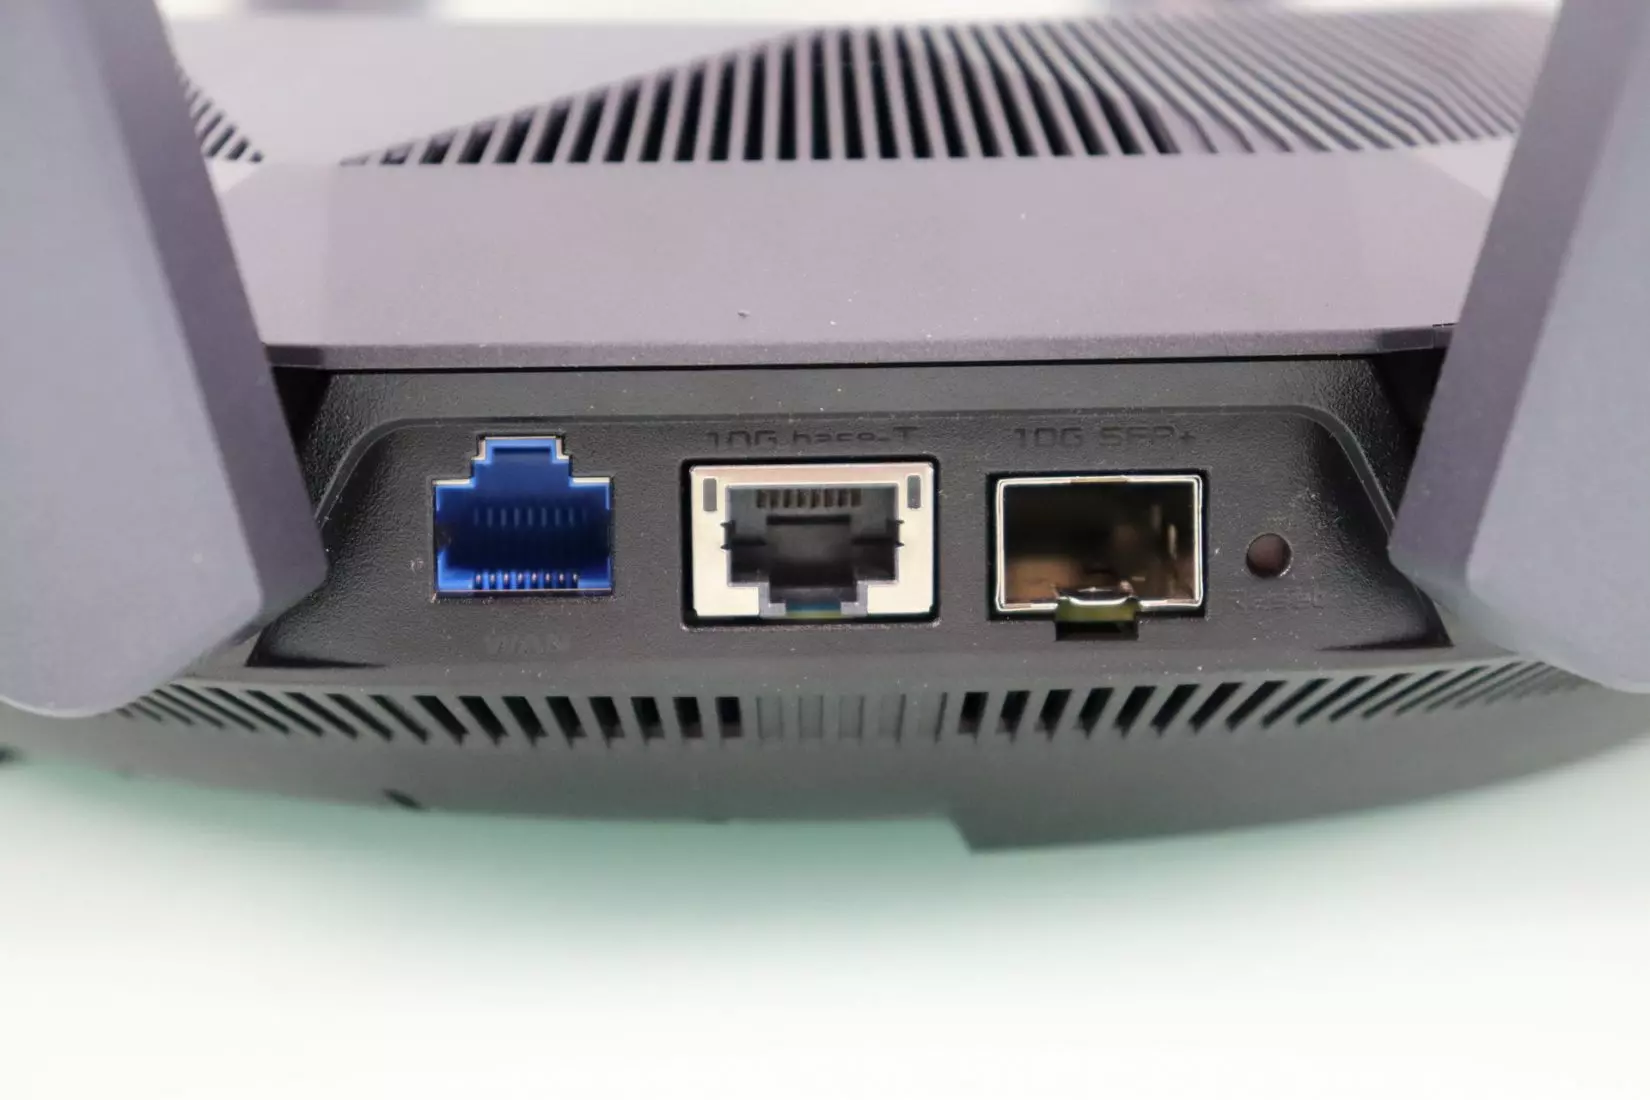 View of the Gigabit WAN port and the two 10G ports of the ASUS RT-AX89X router